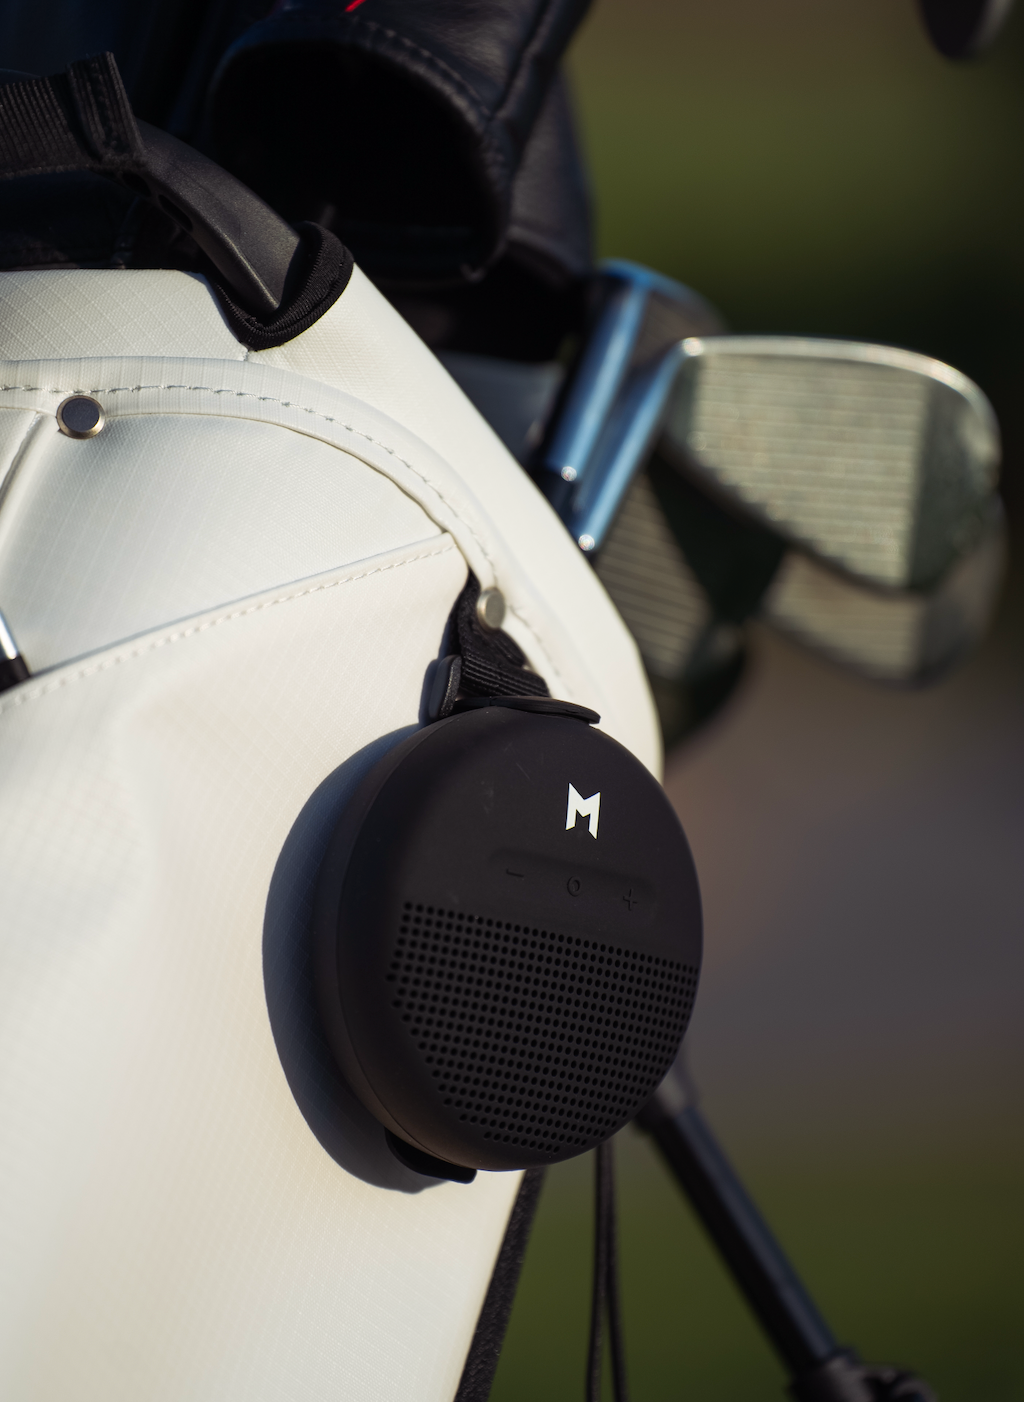 this is the mr1 recycled material golf bag, in white, with our bluetooth speaker displayed.